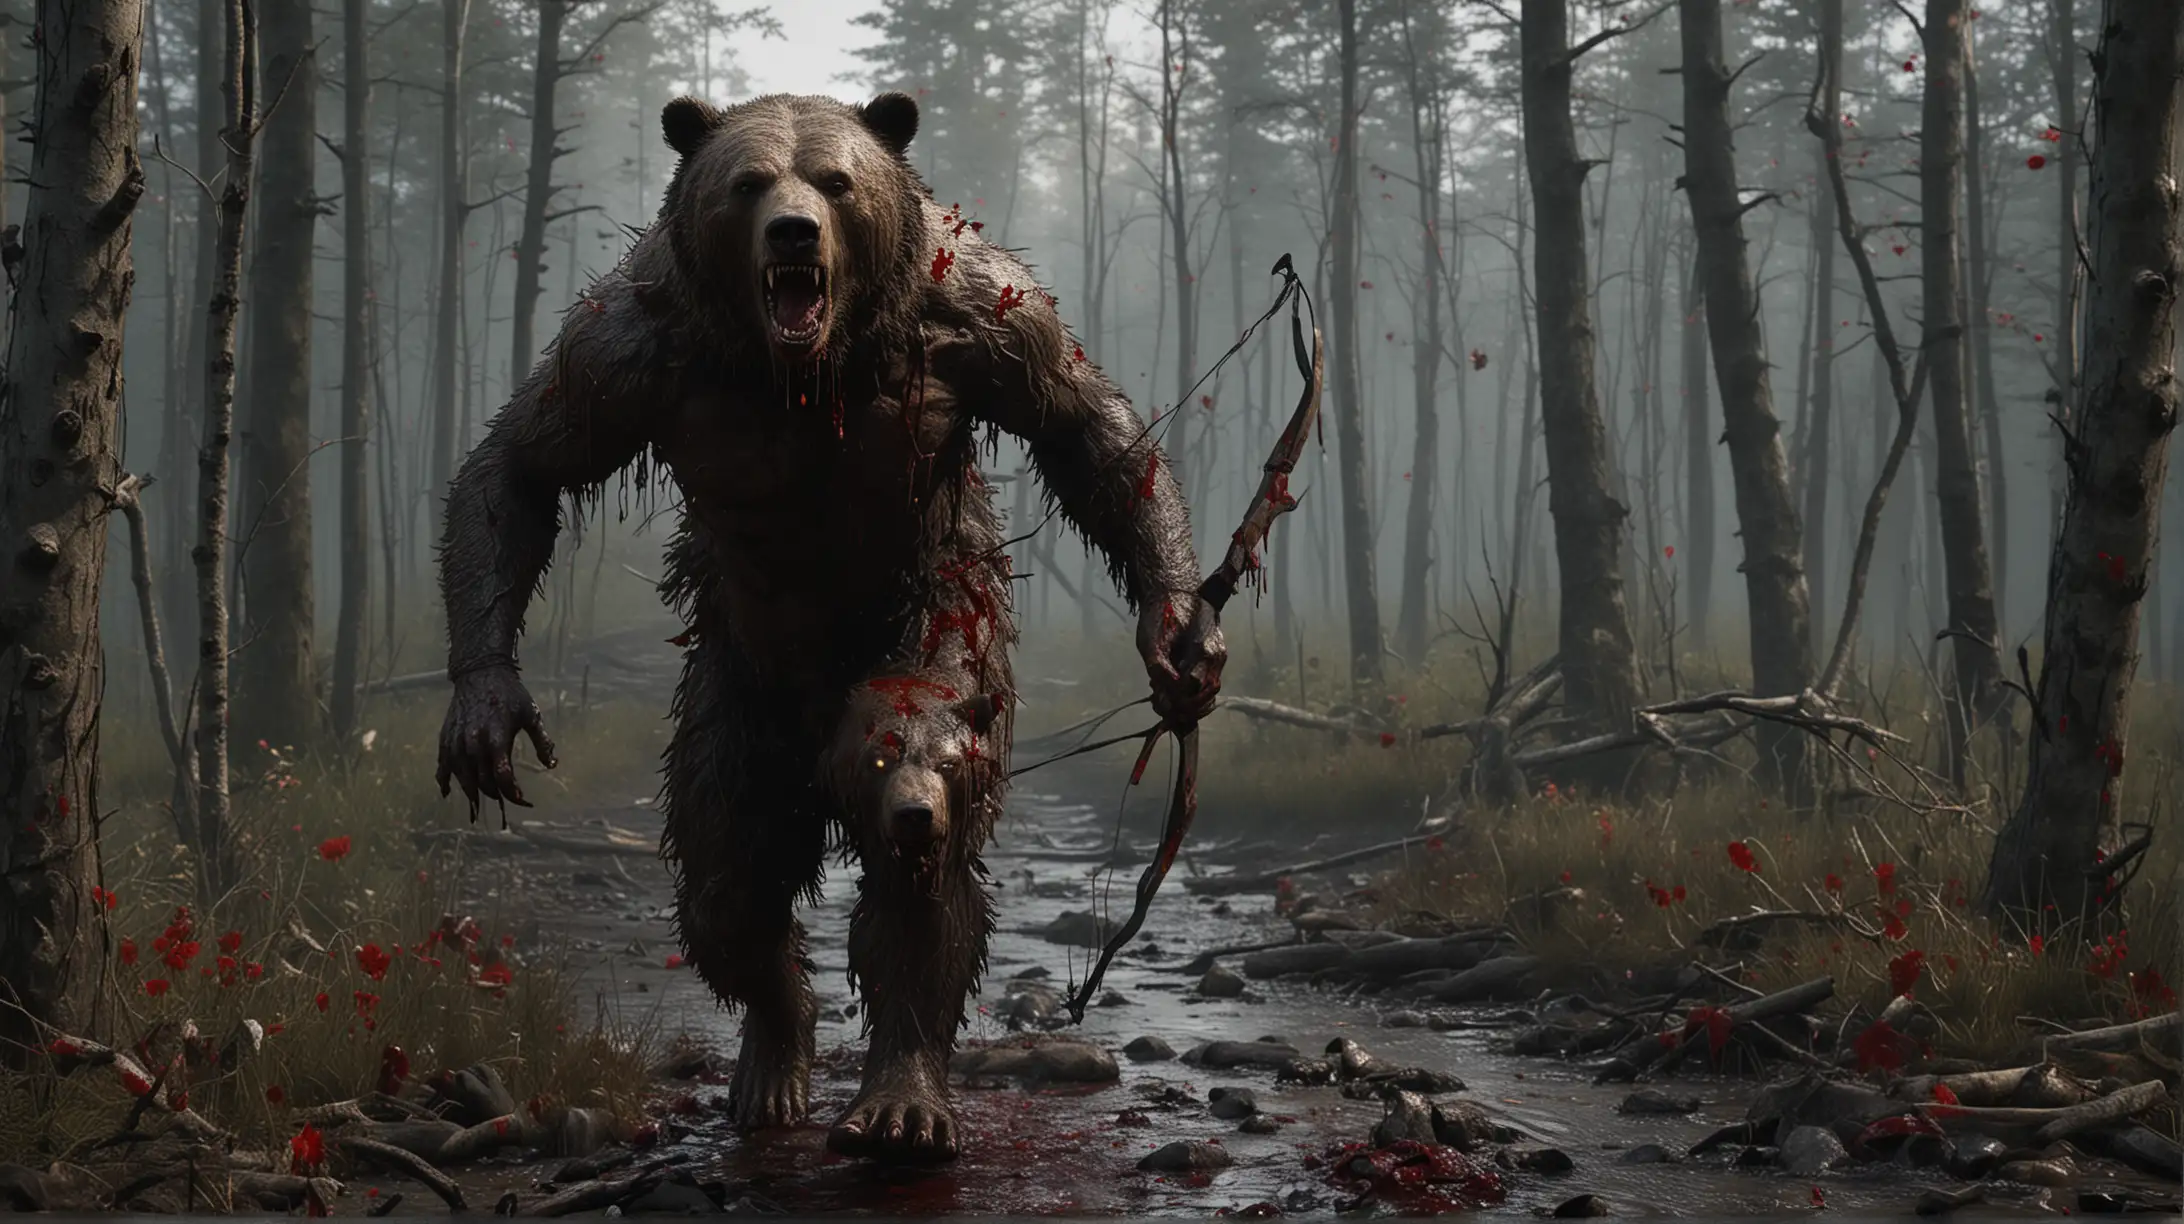 Generate A 4K Hyper realistic Image Of A Man with a bow and arrowing Running from a bear covered in blood.
The man face must be showing fear whilst being covered in blood.
The settings/ Location must be in a muddy forest area at dawn.